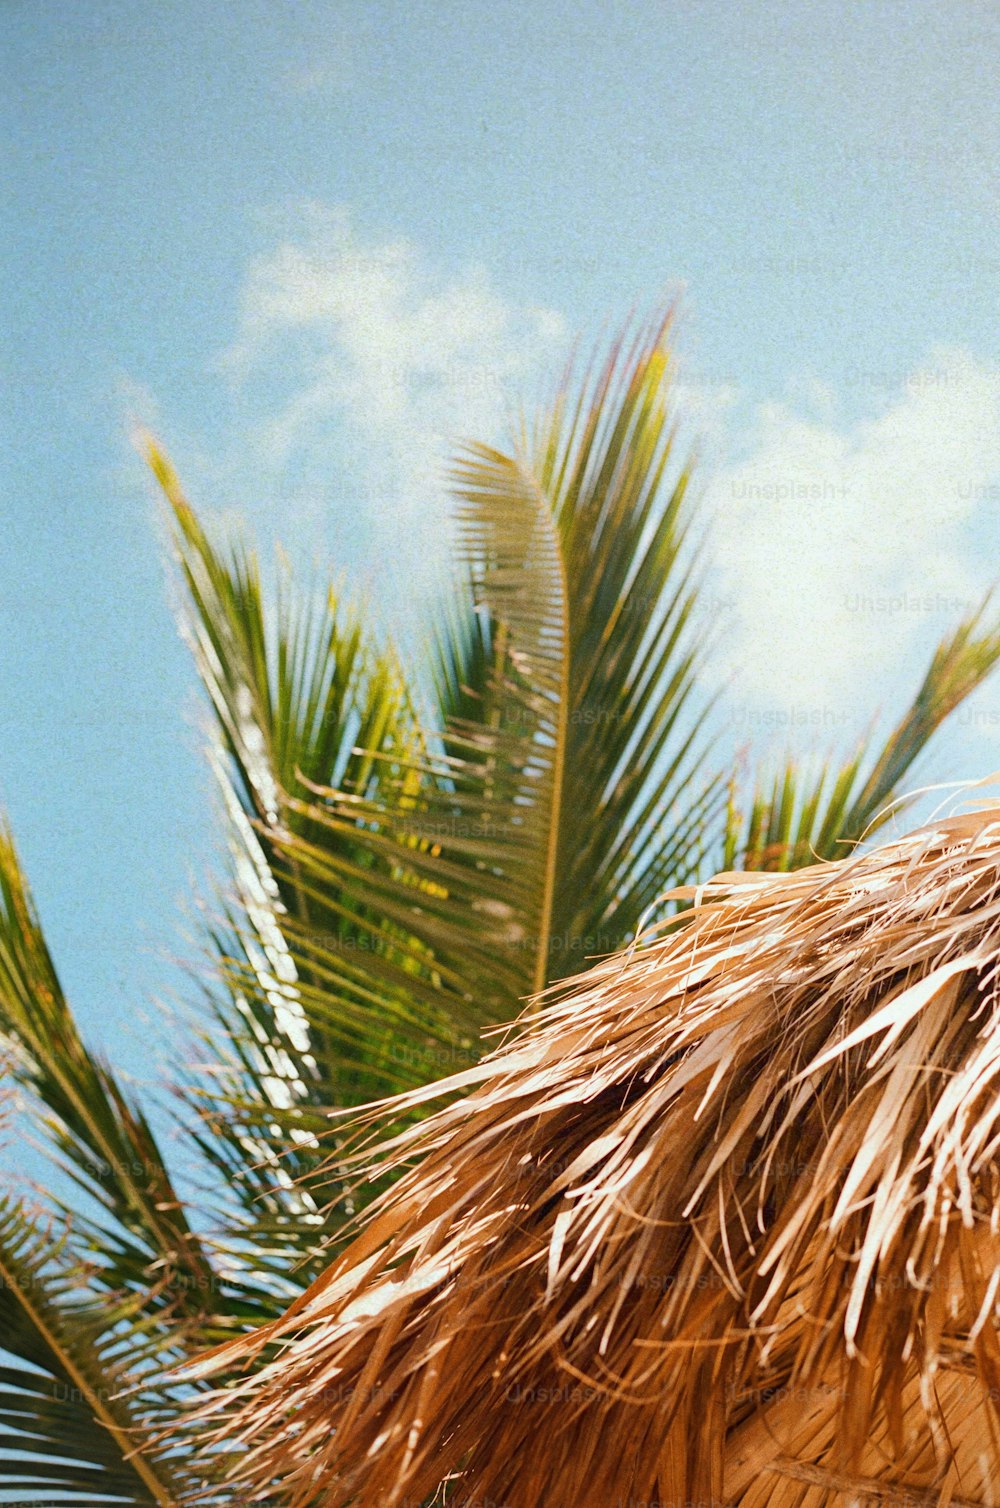 a close up of a straw umbrella with palm trees in the background